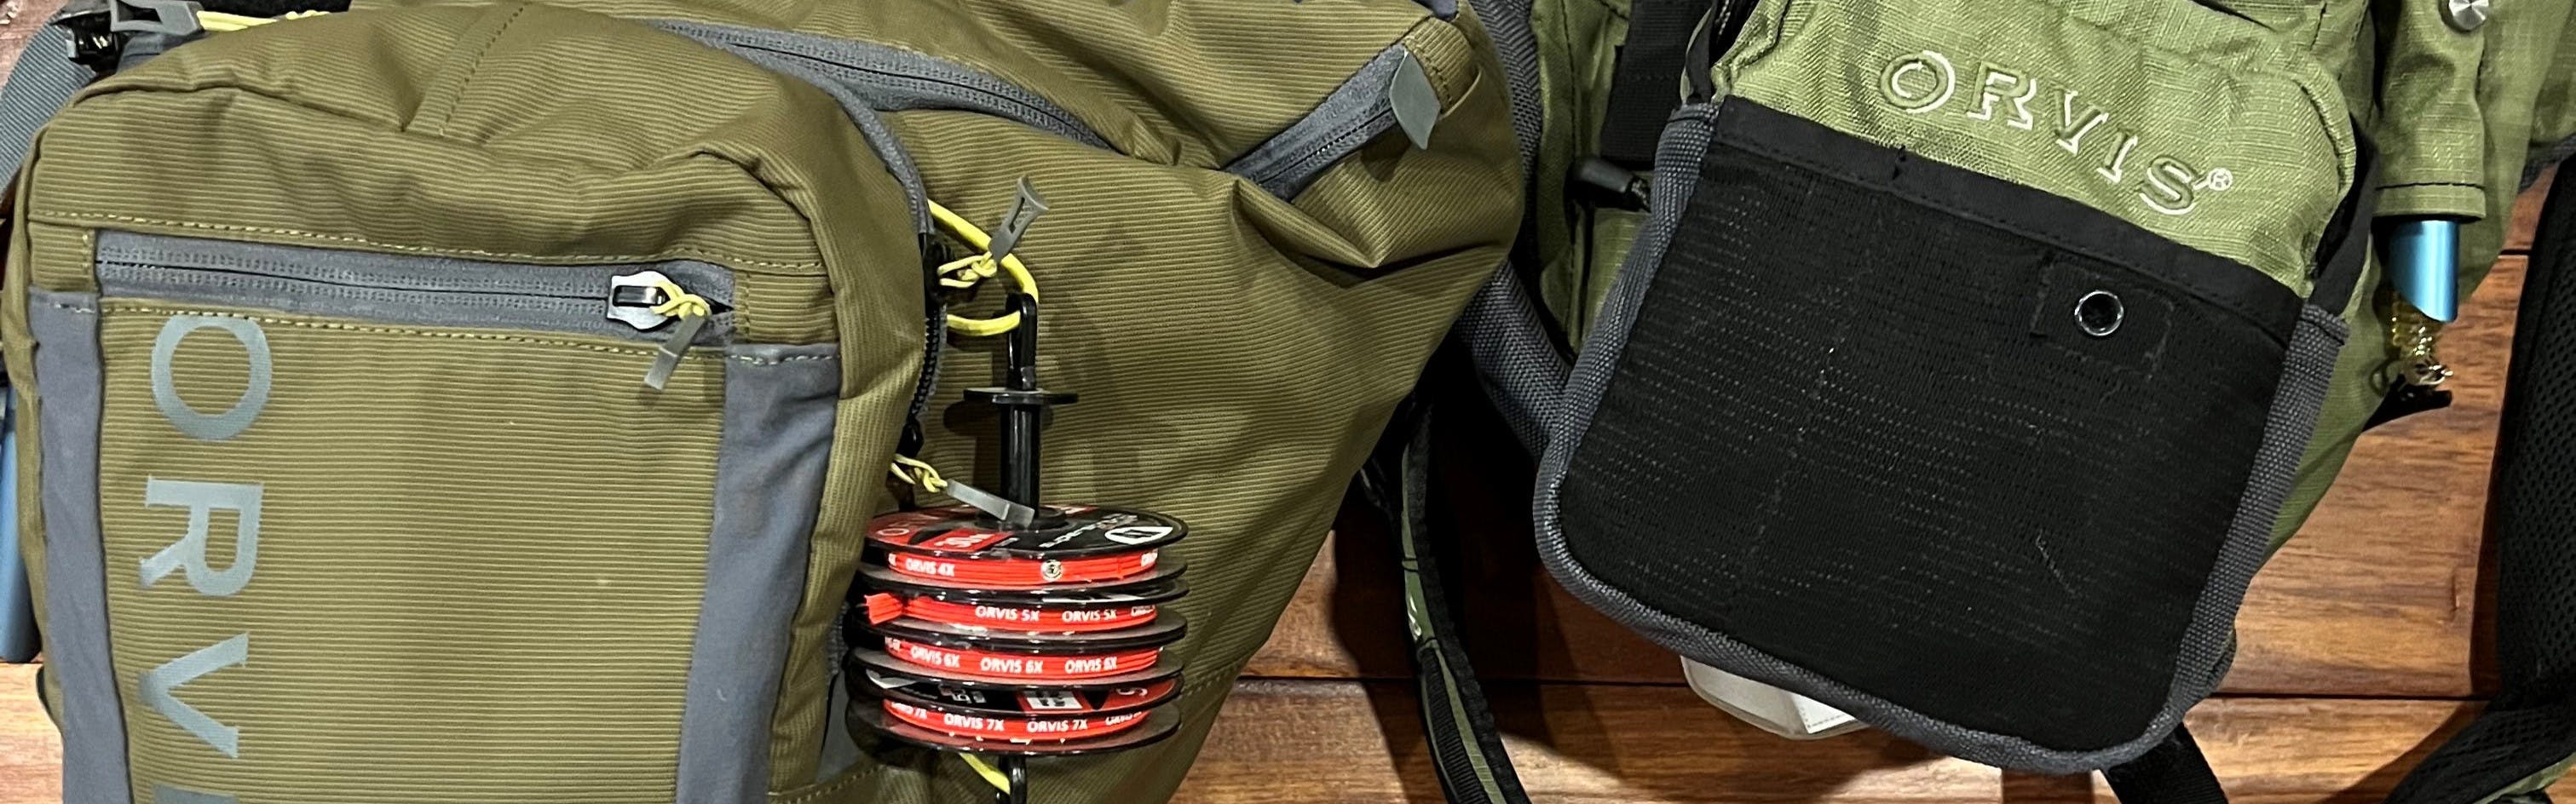 The Ultimate Fly Fishing Sling Pack Reviews (5 Models) - Guide Recommended